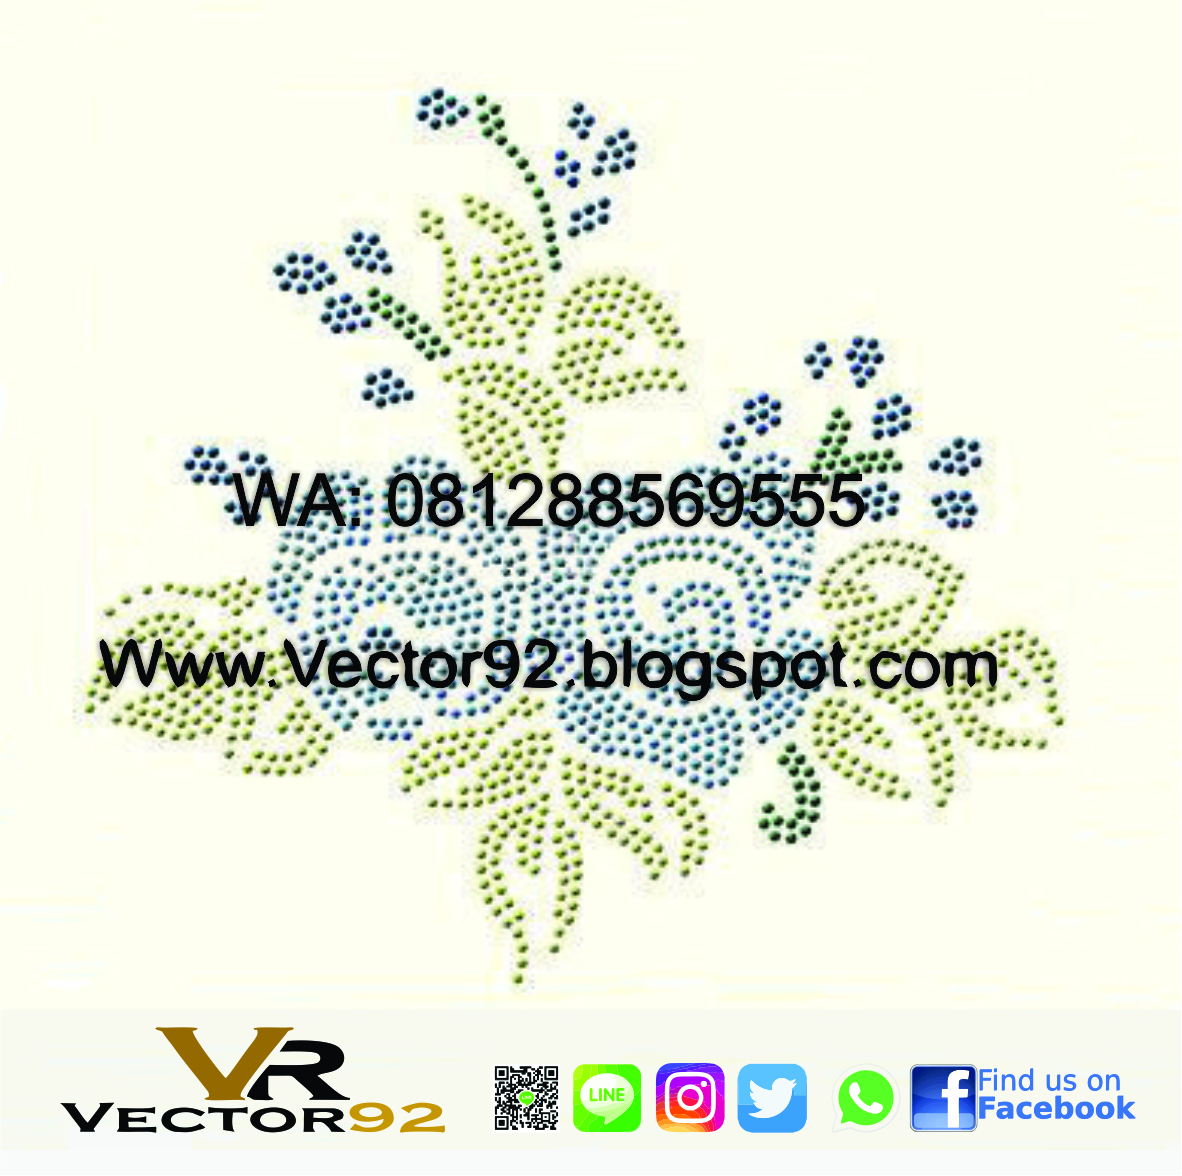 Vector92 Collections : • vector92collection 